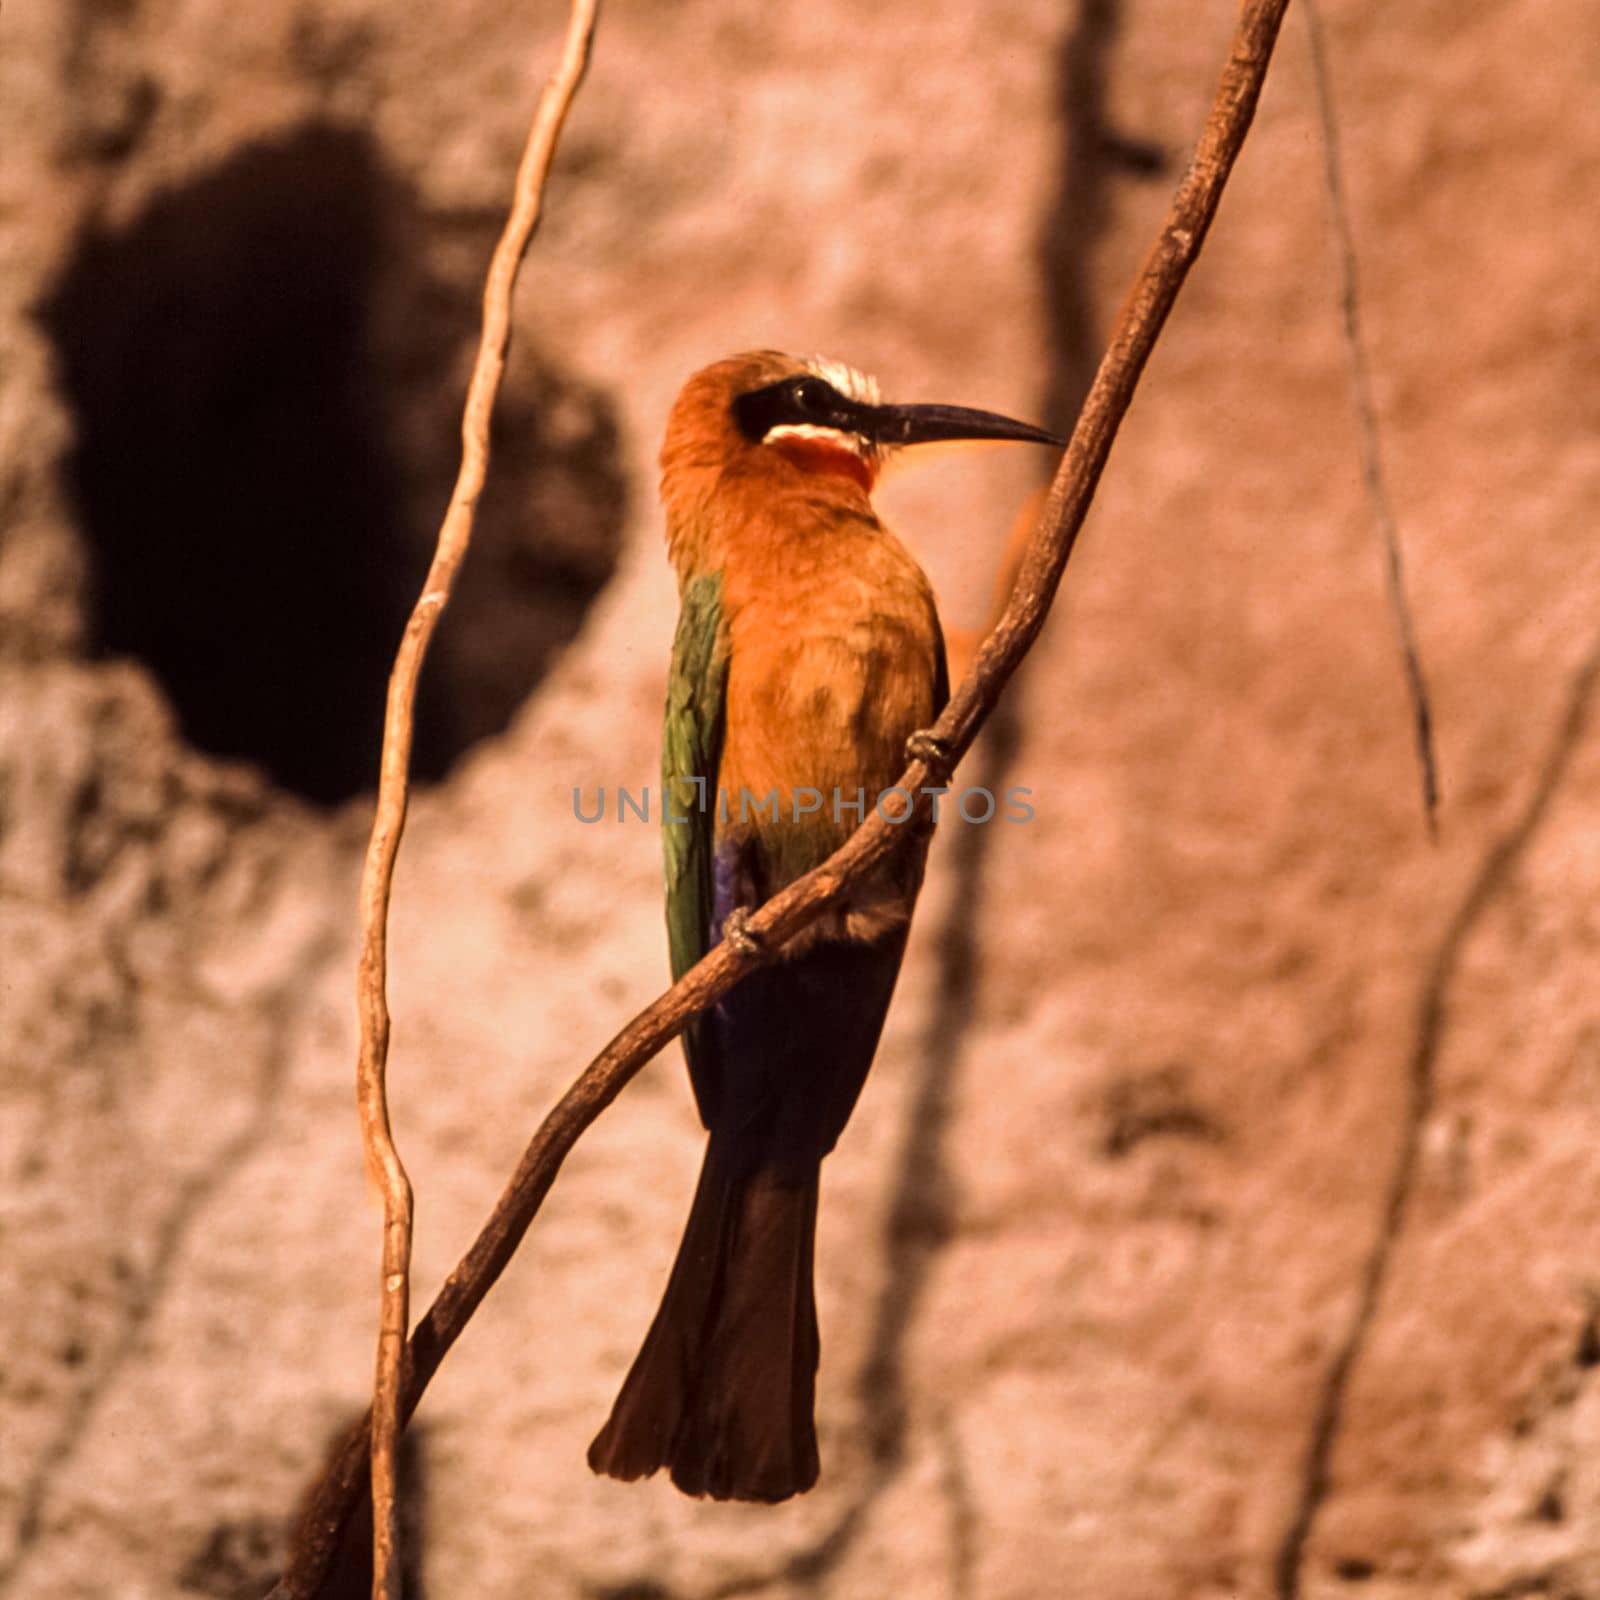 Whitefronted Bee-eater by Giamplume